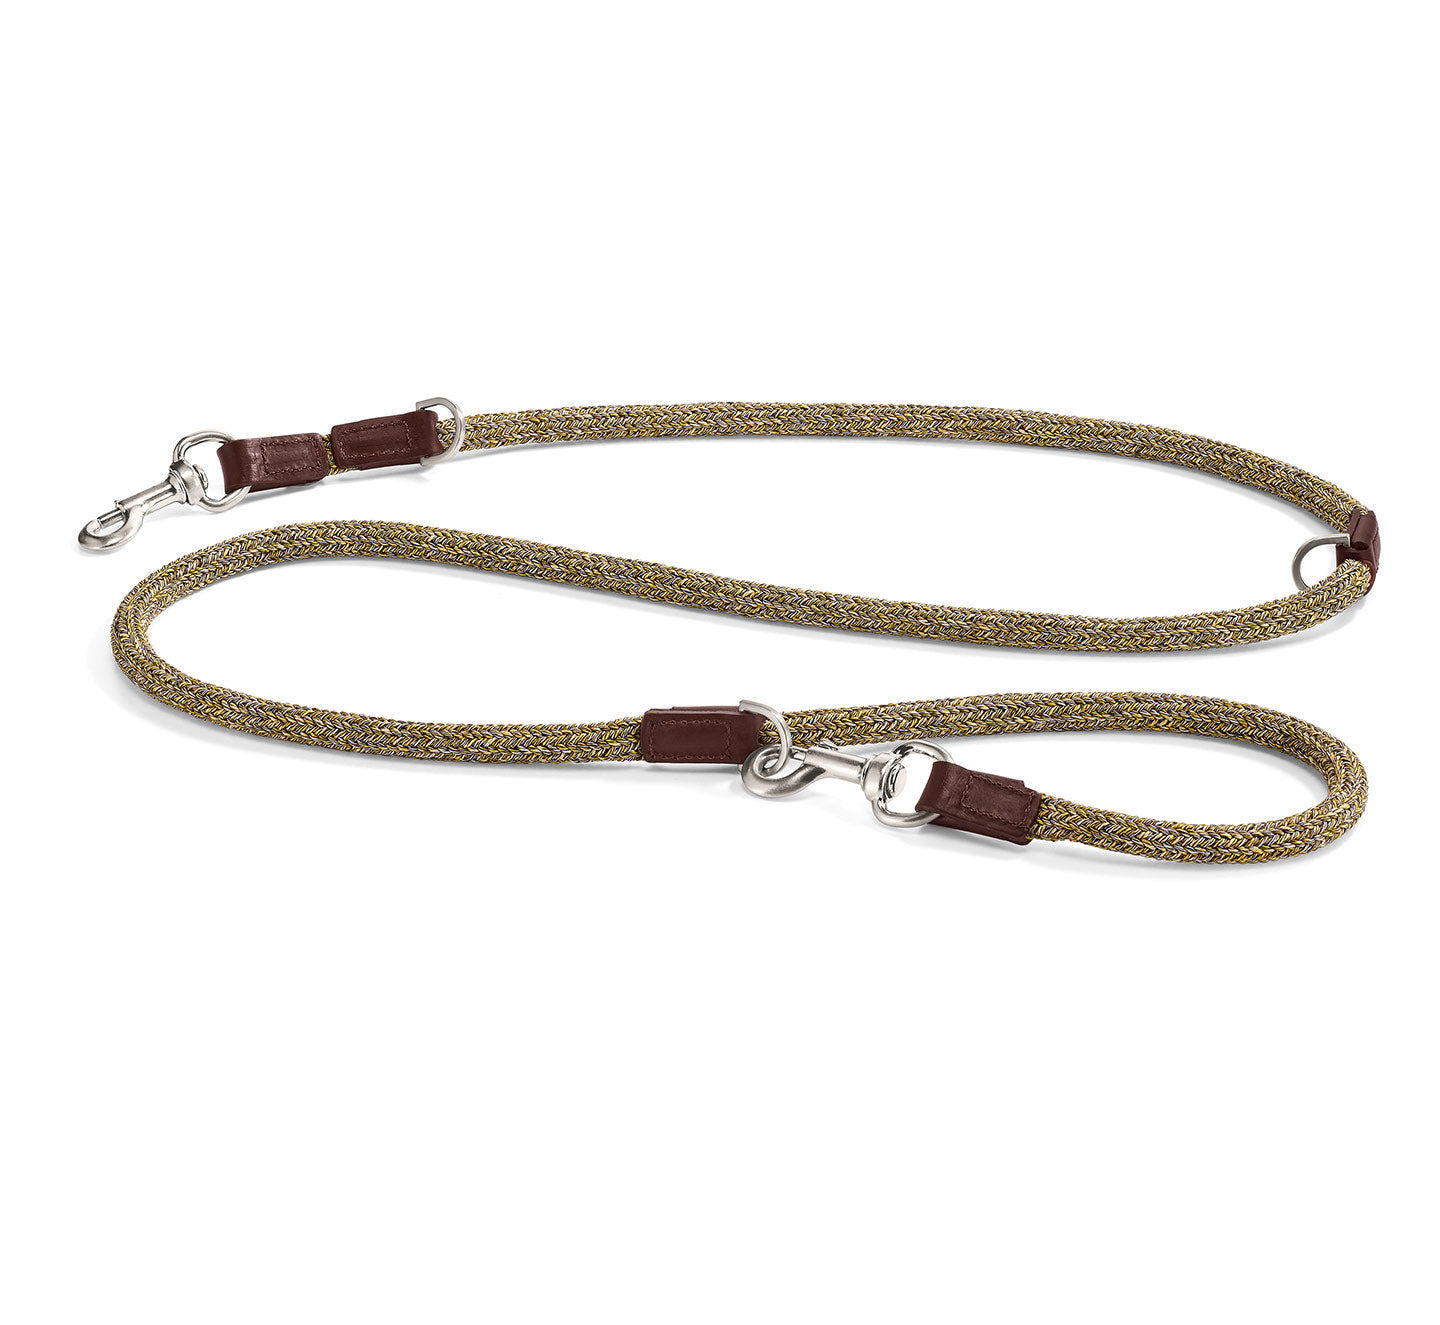 Luxurious dog leash from the Lucca collection